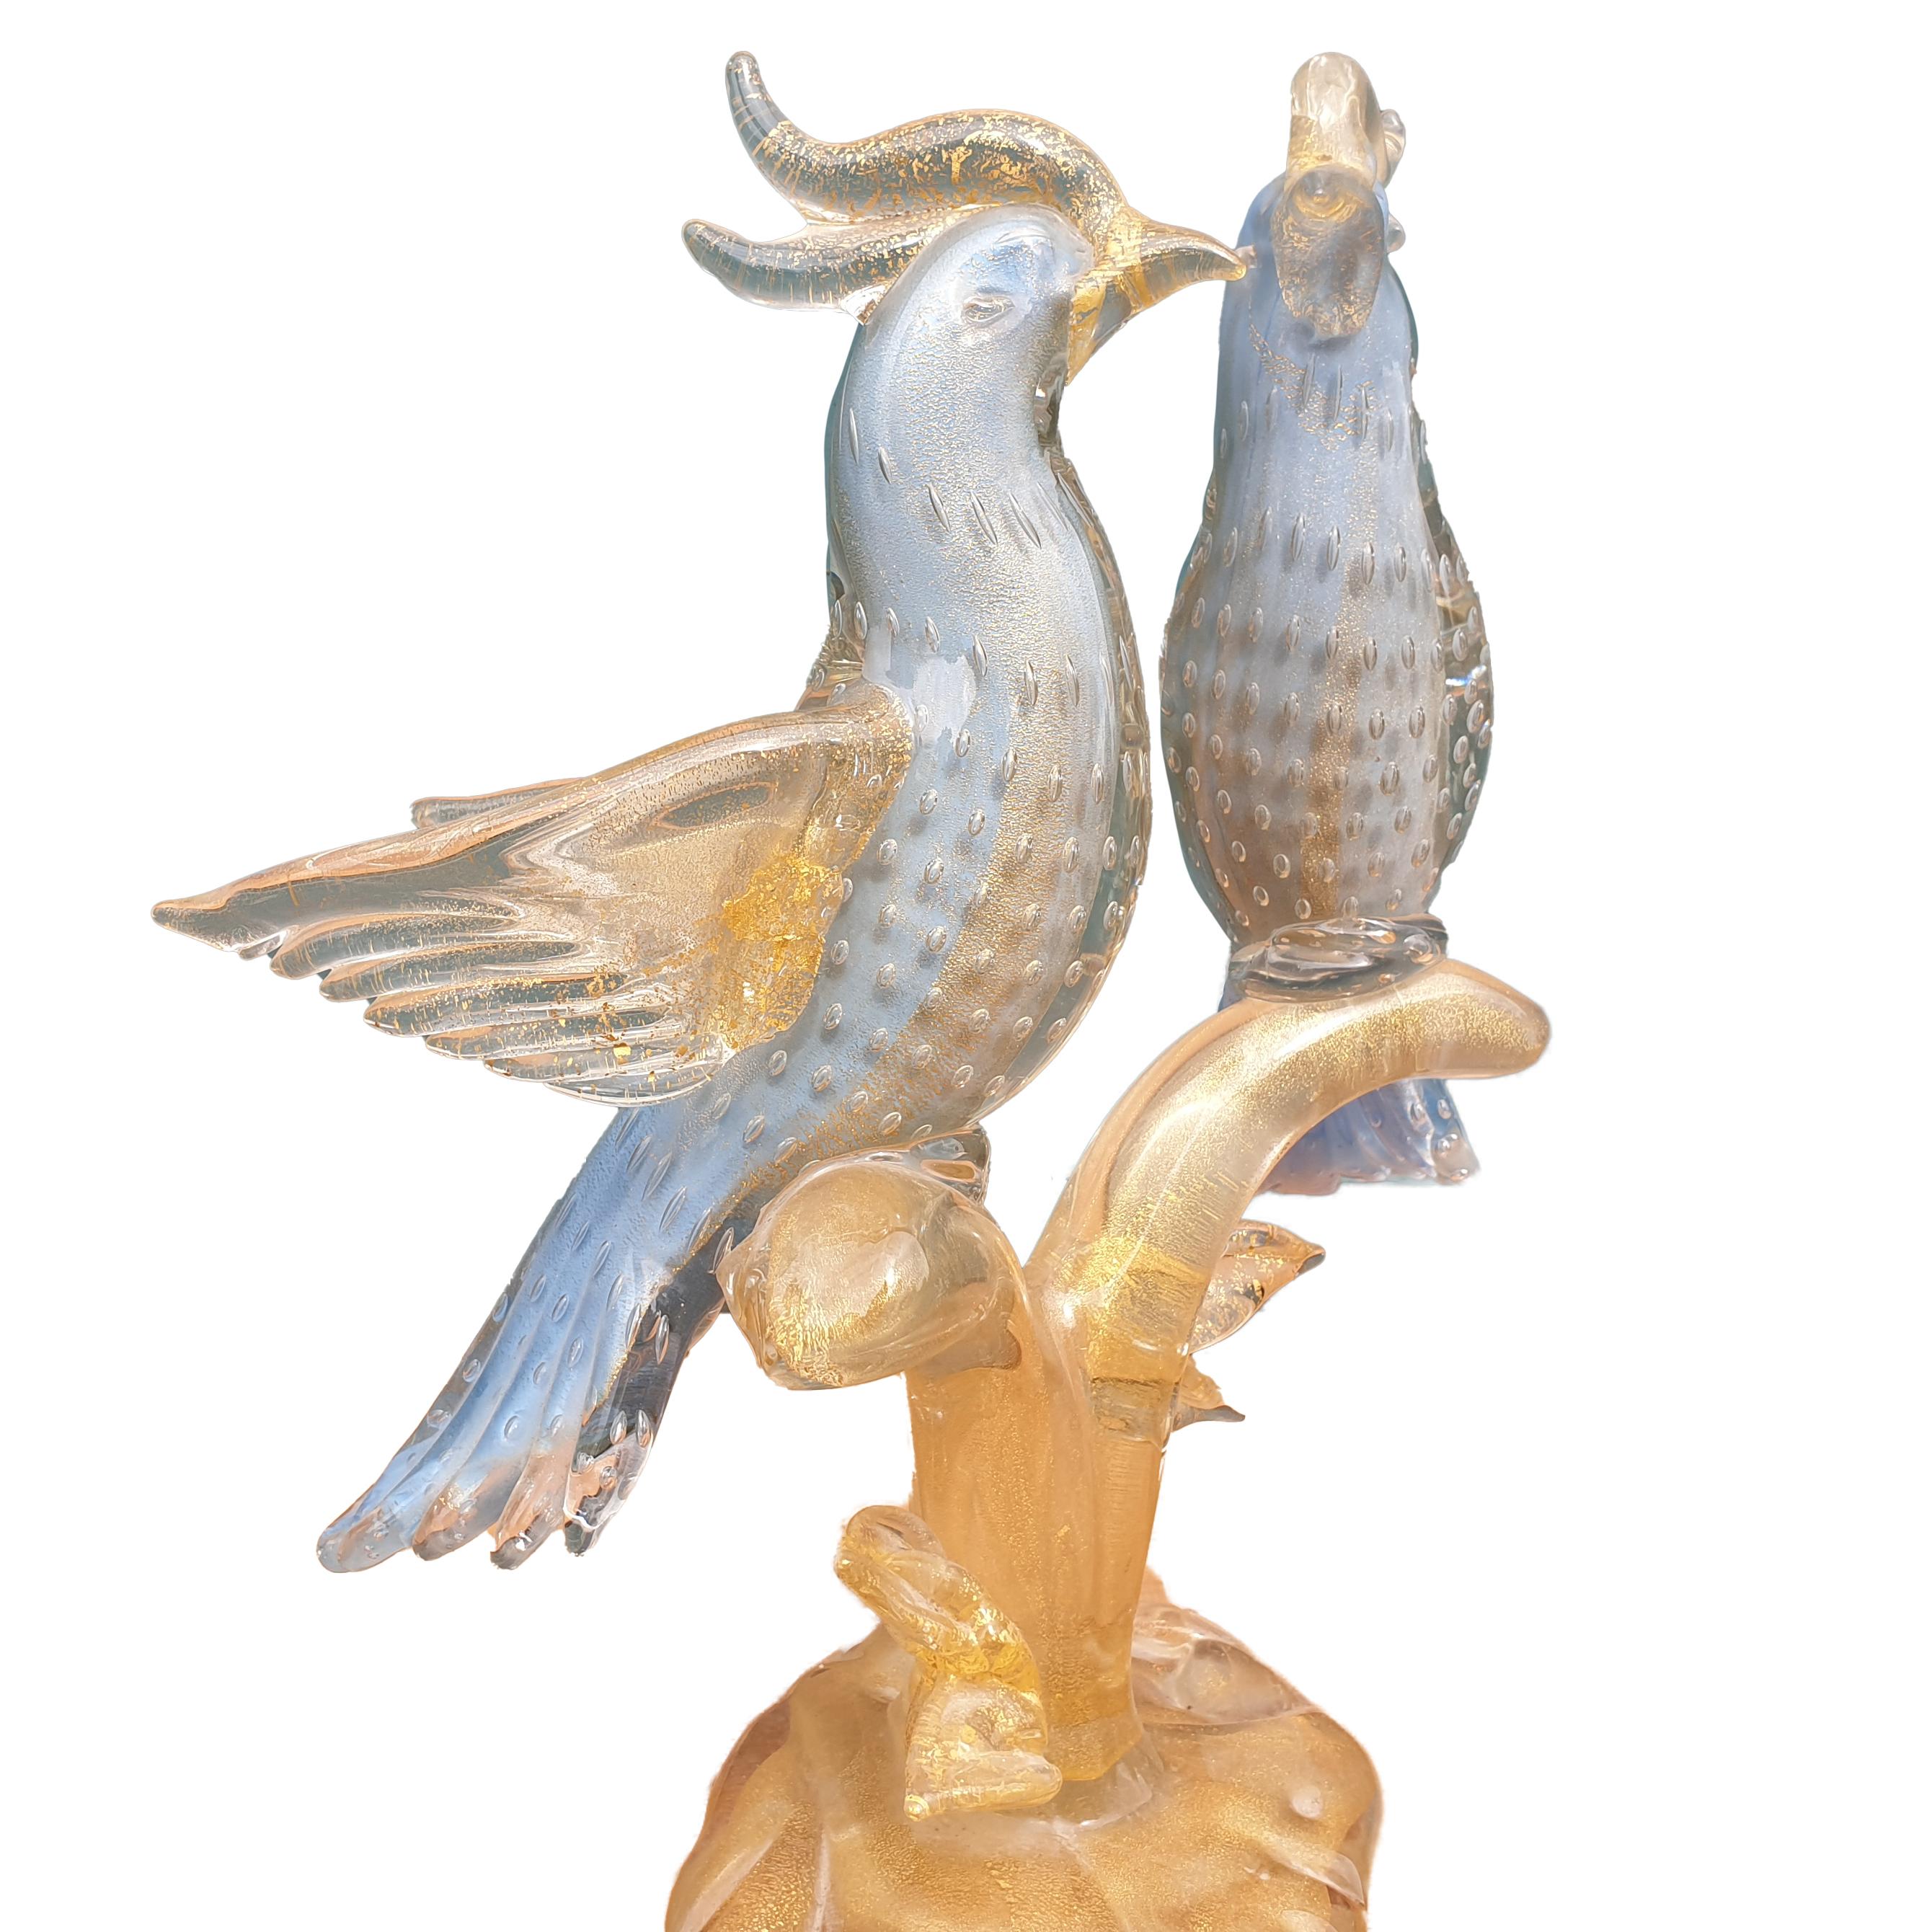 Stunning Murano Venetian Blue Gold Fleck Bird figurine sculpture depicting two birds sitting on a tree branch. Commonly known as the 